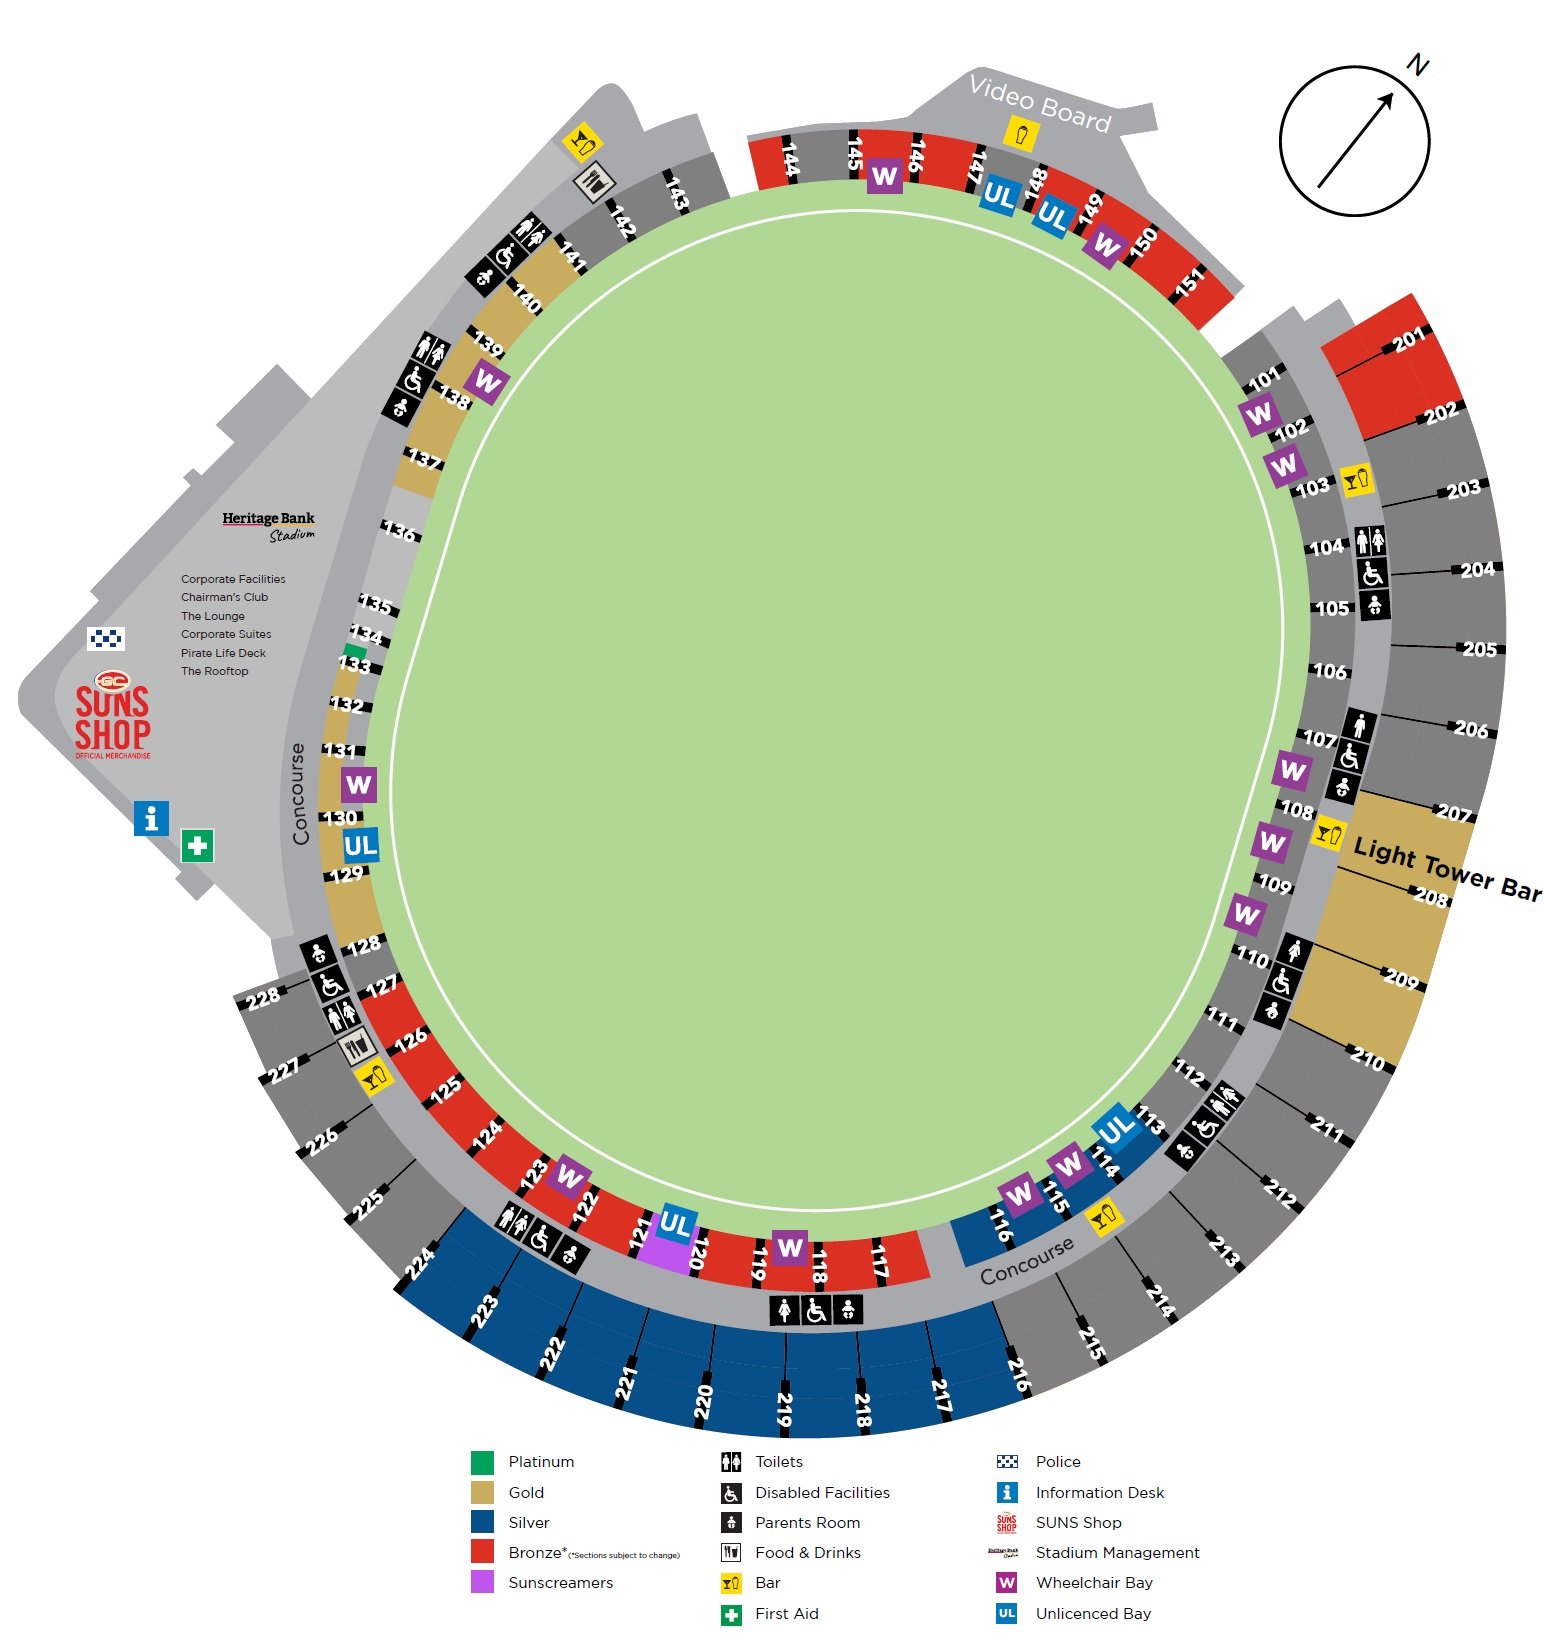 Heritage Bank Stadium Seating Map with Rows and Stands